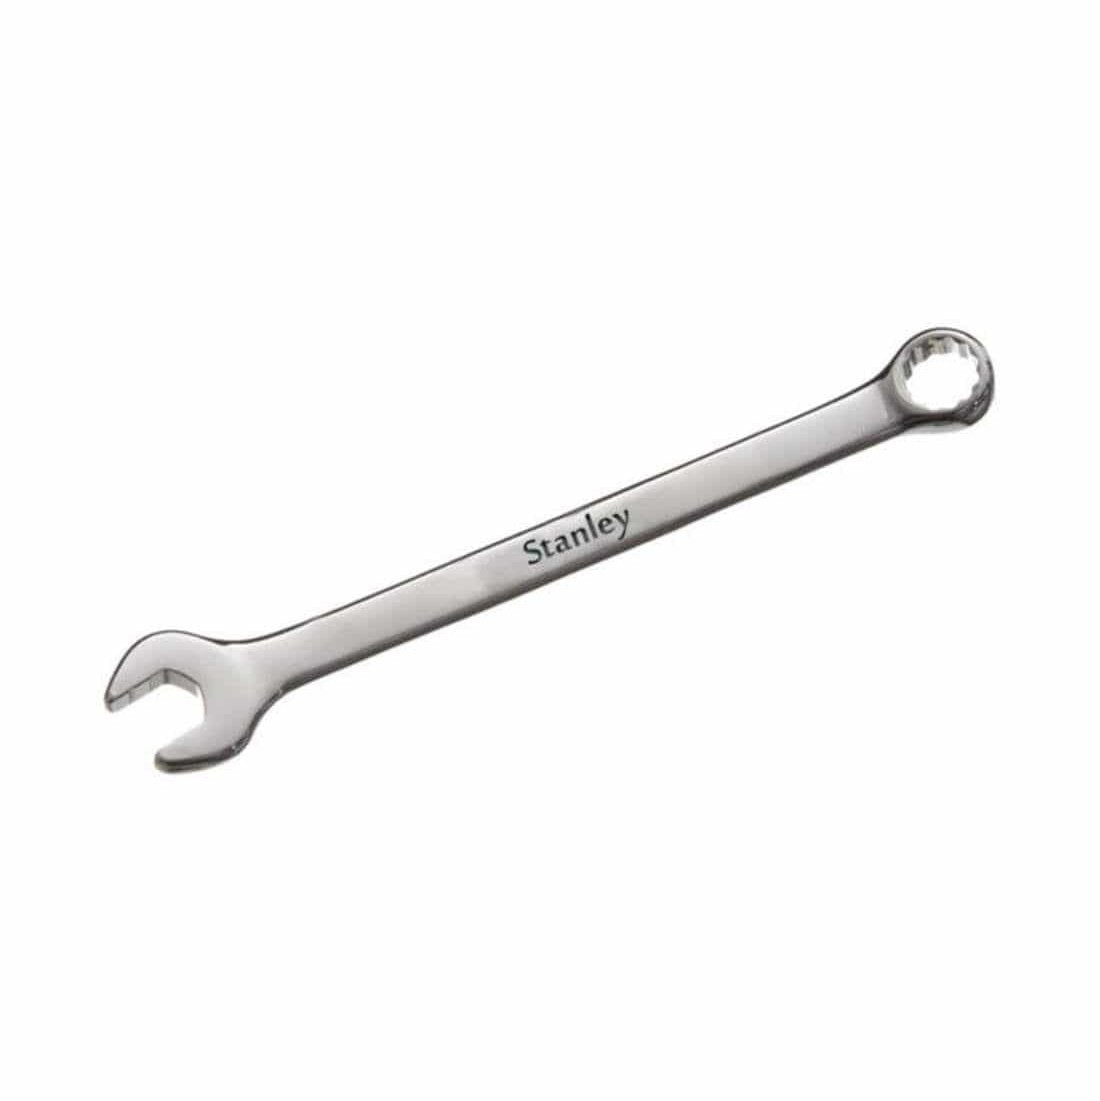 Stanley 17mm Combination Wrench - STMT72814-8 | Supply Master, Accra, Ghana Wrenches Buy Tools hardware Building materials